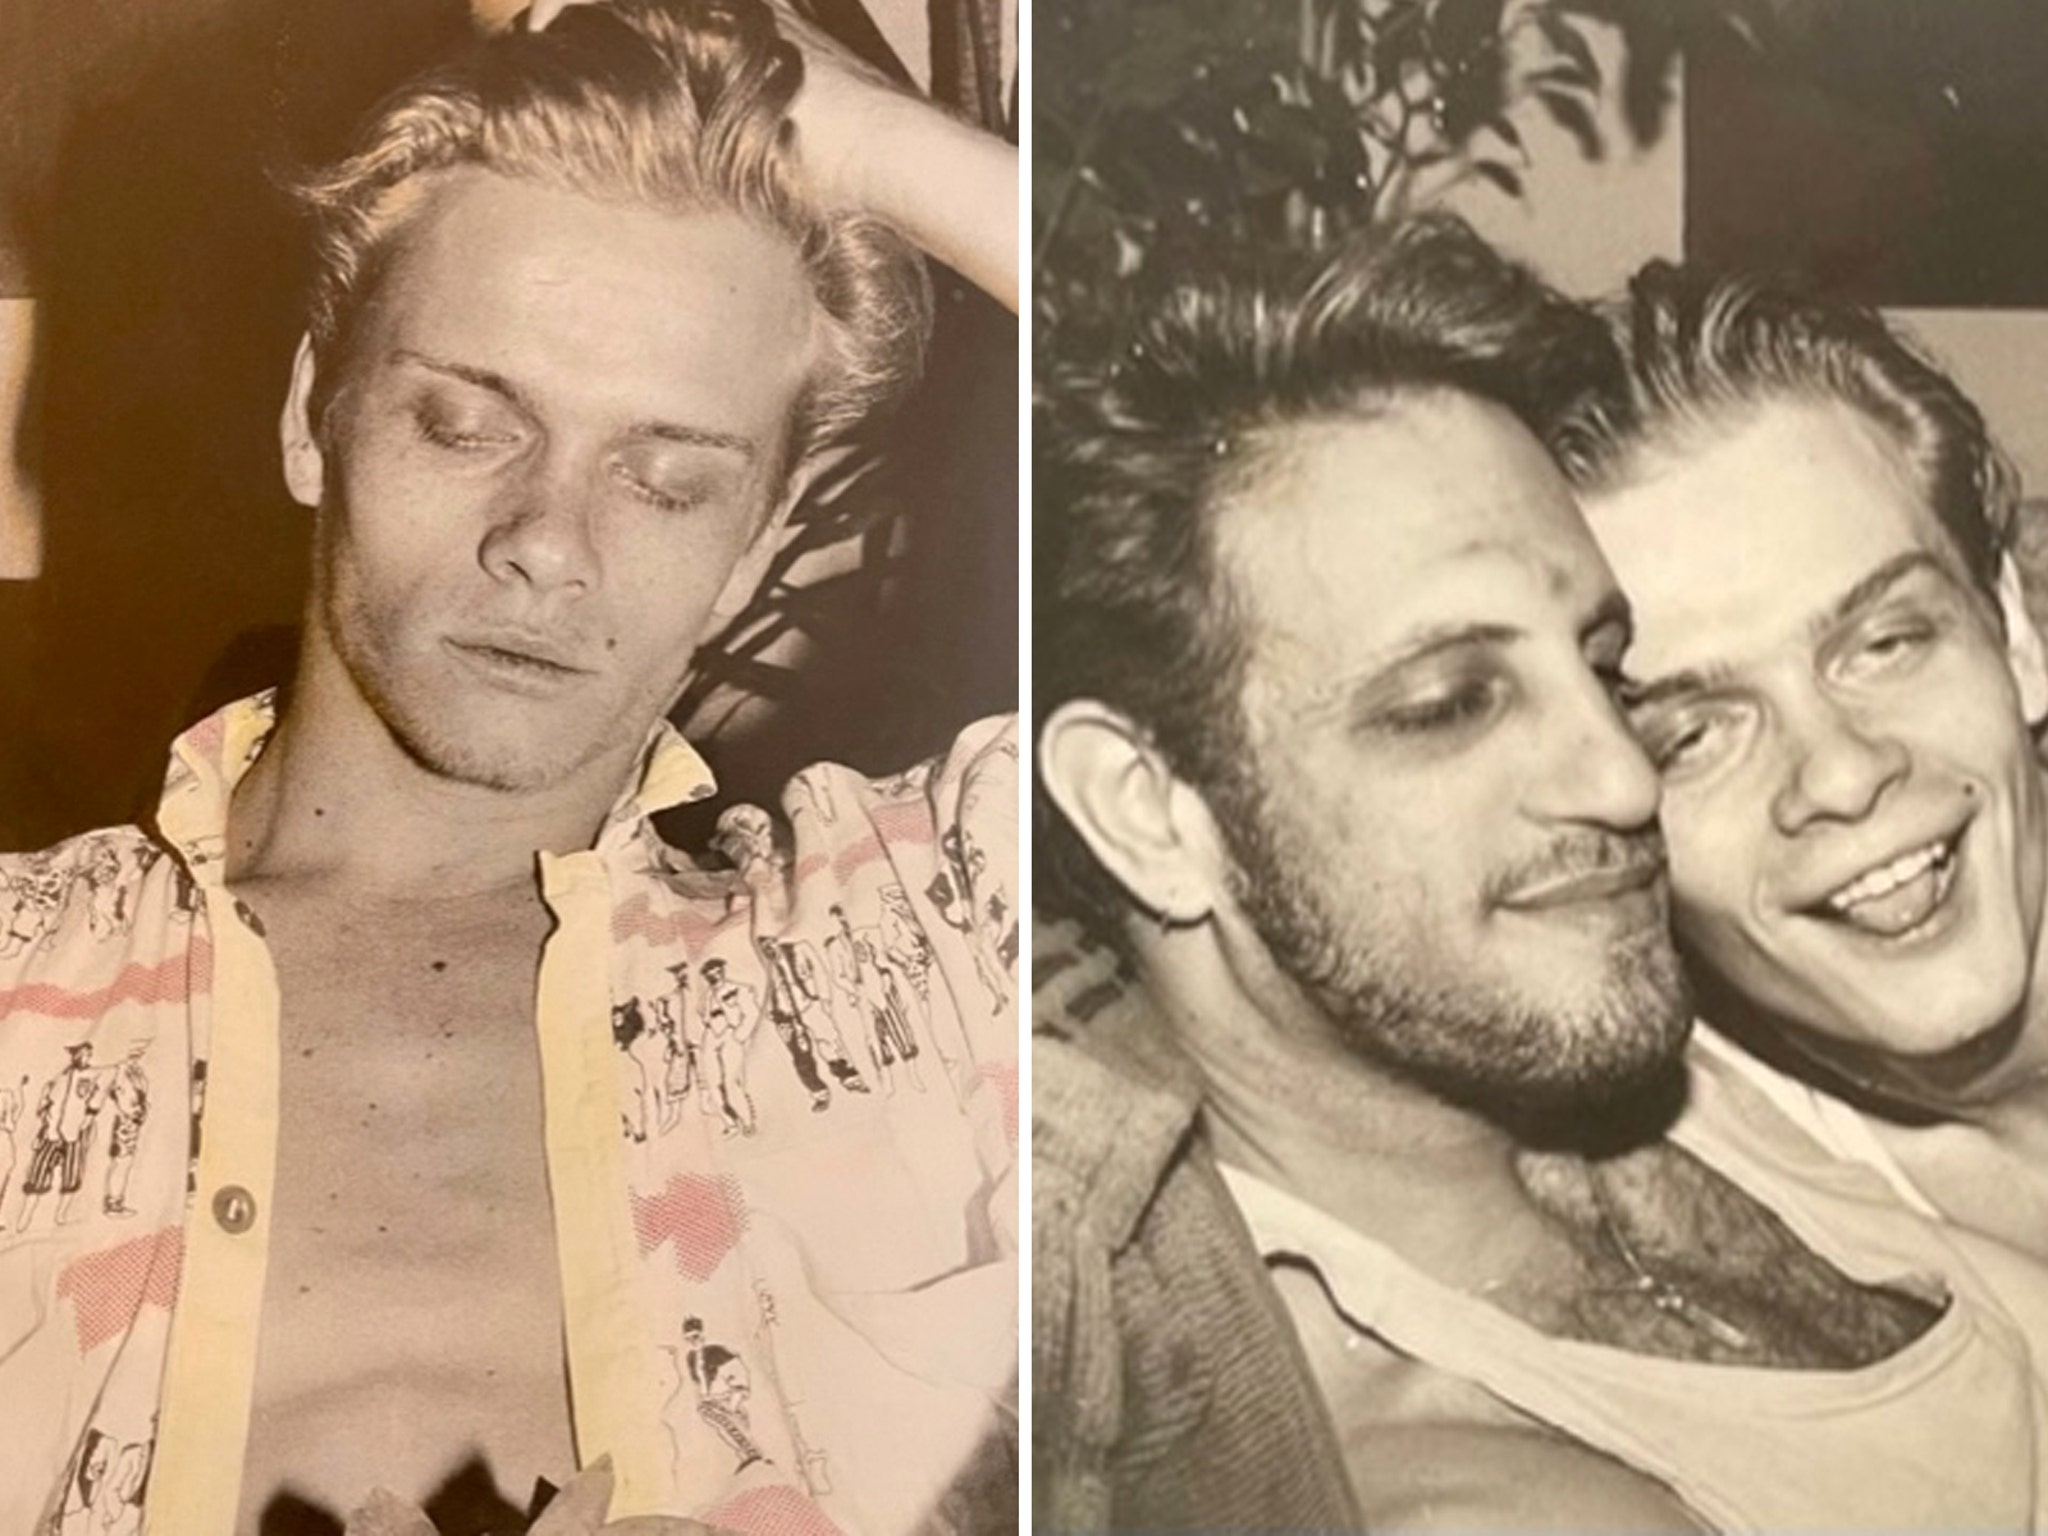 Gay Porn Star Billy Newtons Brutal Murder Solved Thanks to Amateur Sleuths 32 Years Later picture pic